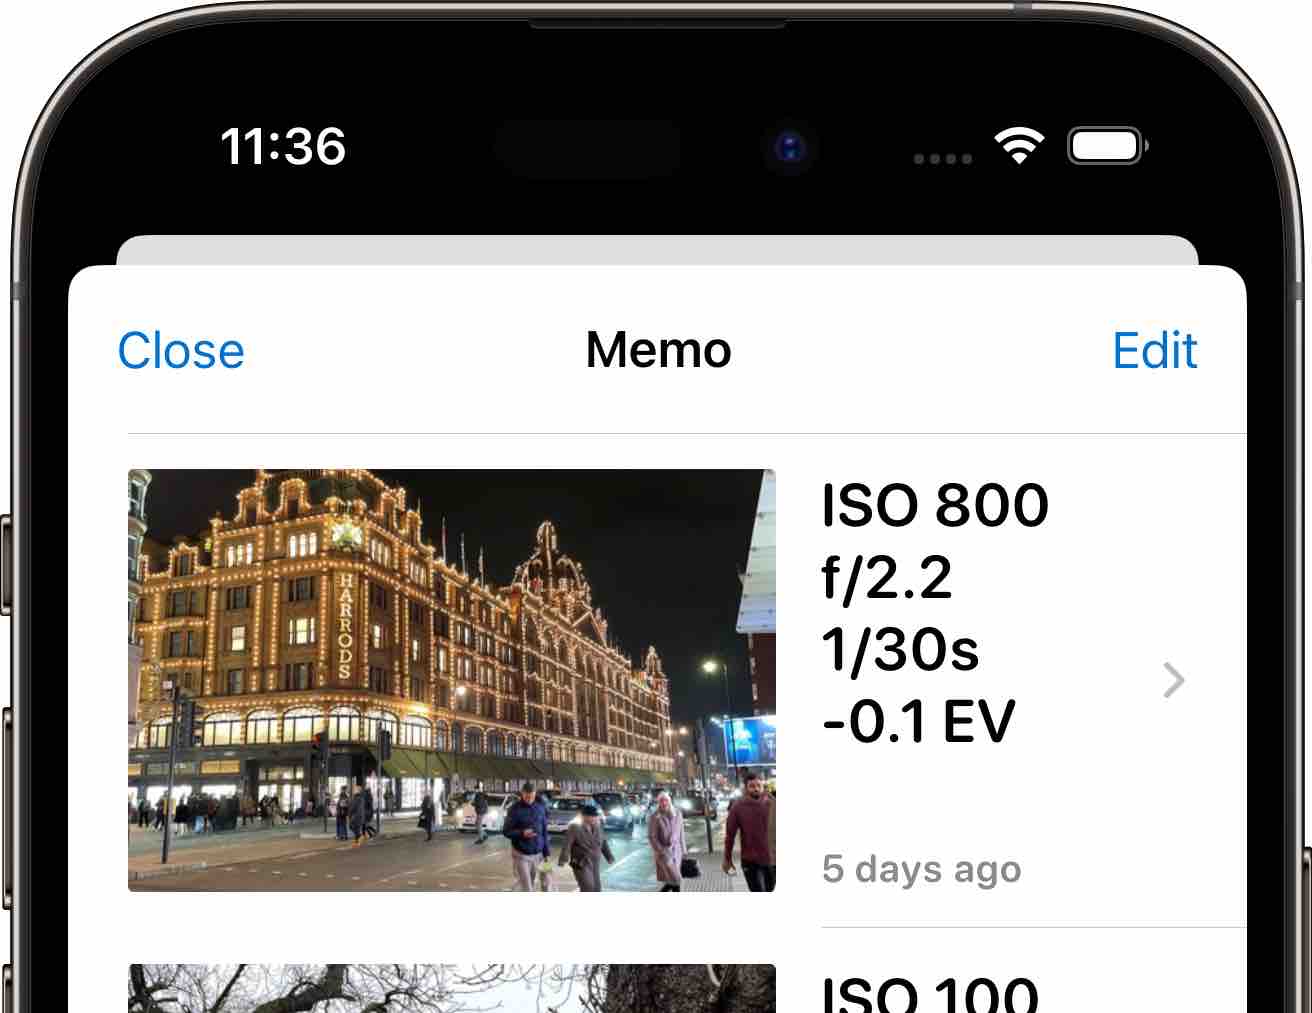 List of memos of exposure settings with a photo of the scene